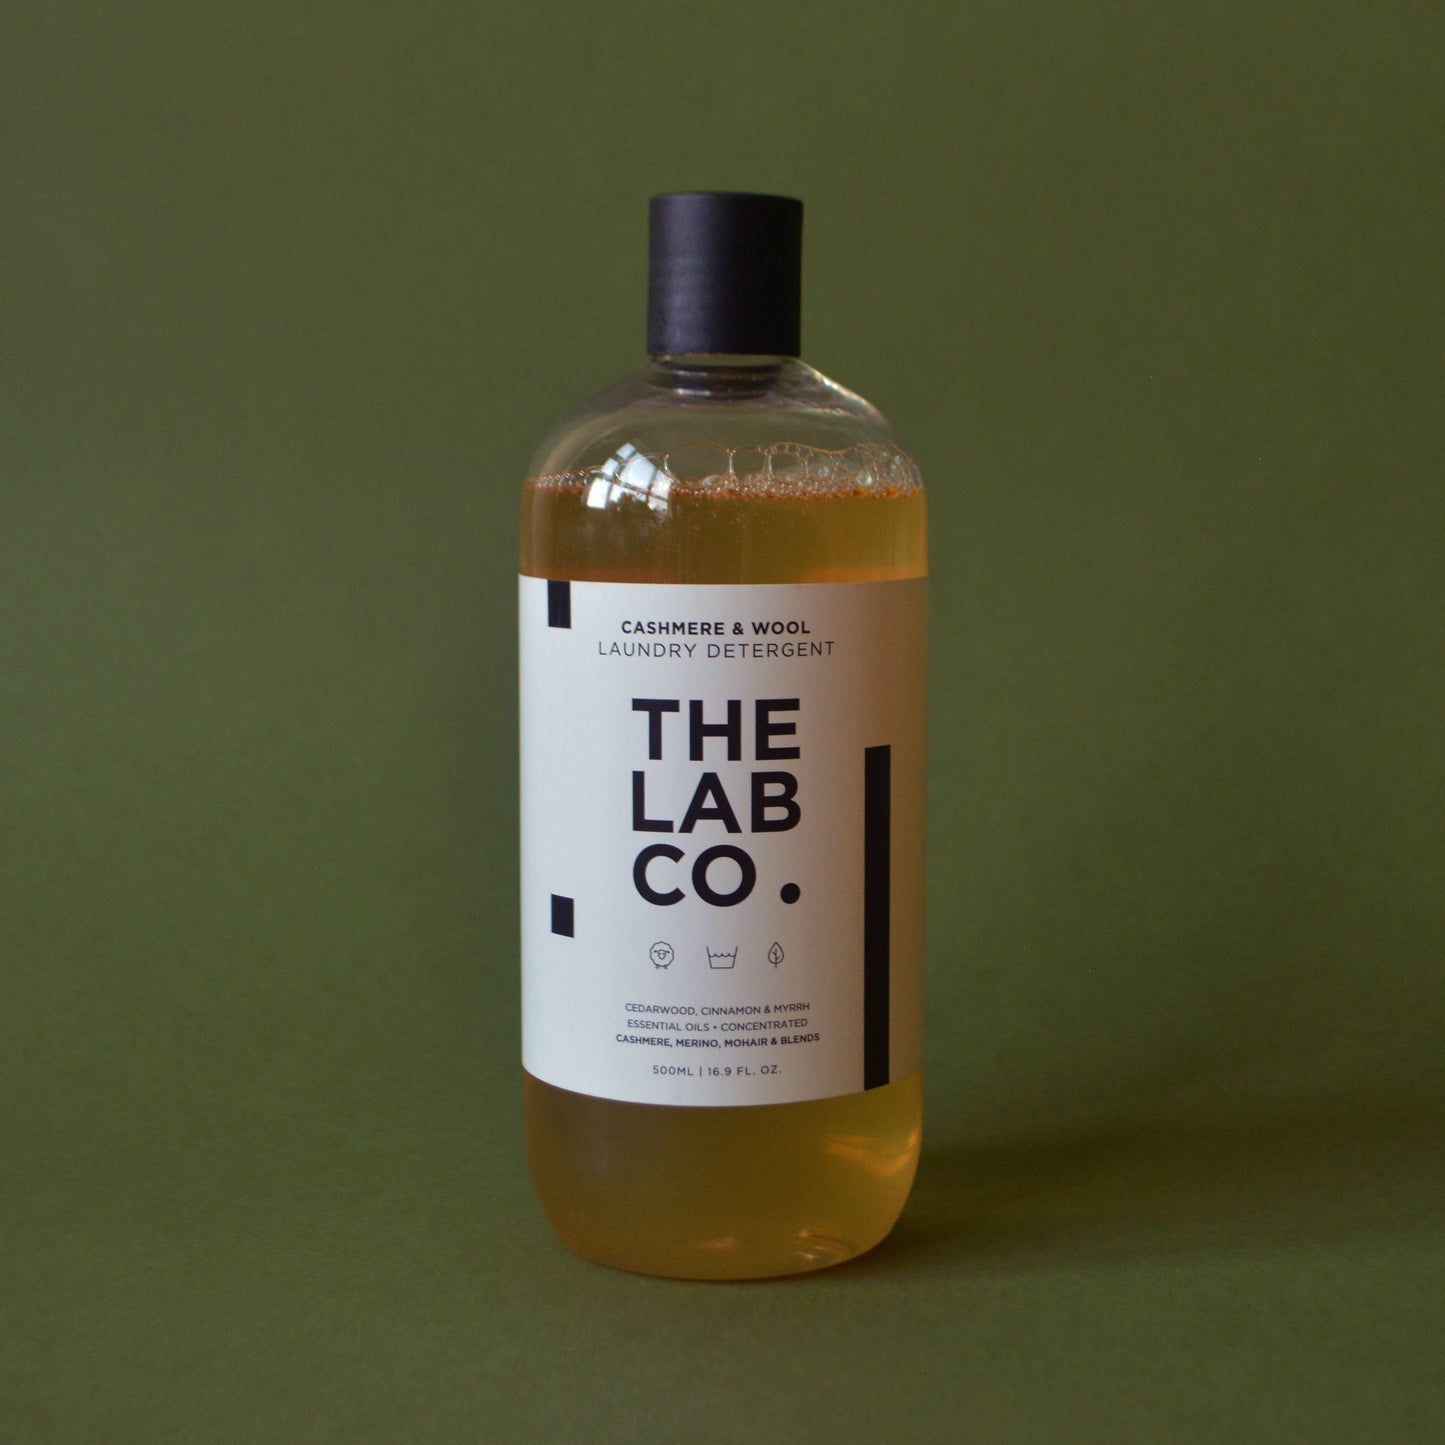 The Lab Co. | Cashmere & Wool Laundry Detergent